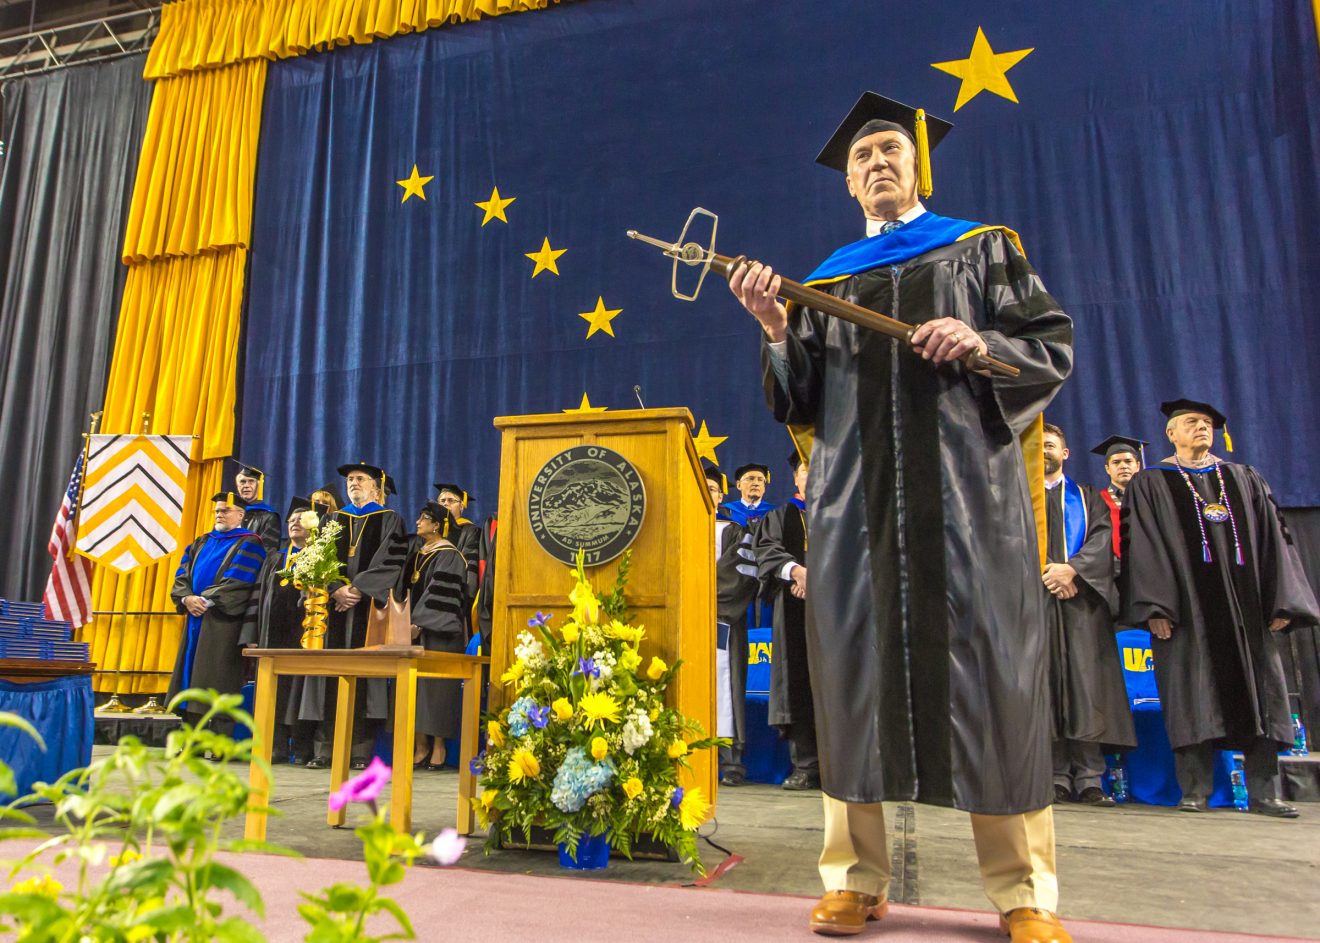 Stephen Jewett stands onstage at commencement holding the mace. He is dressed in cap and gown. The other members of the stage party, also in cap and gown, are behind him. A giant Alaska flag hangs in the background.